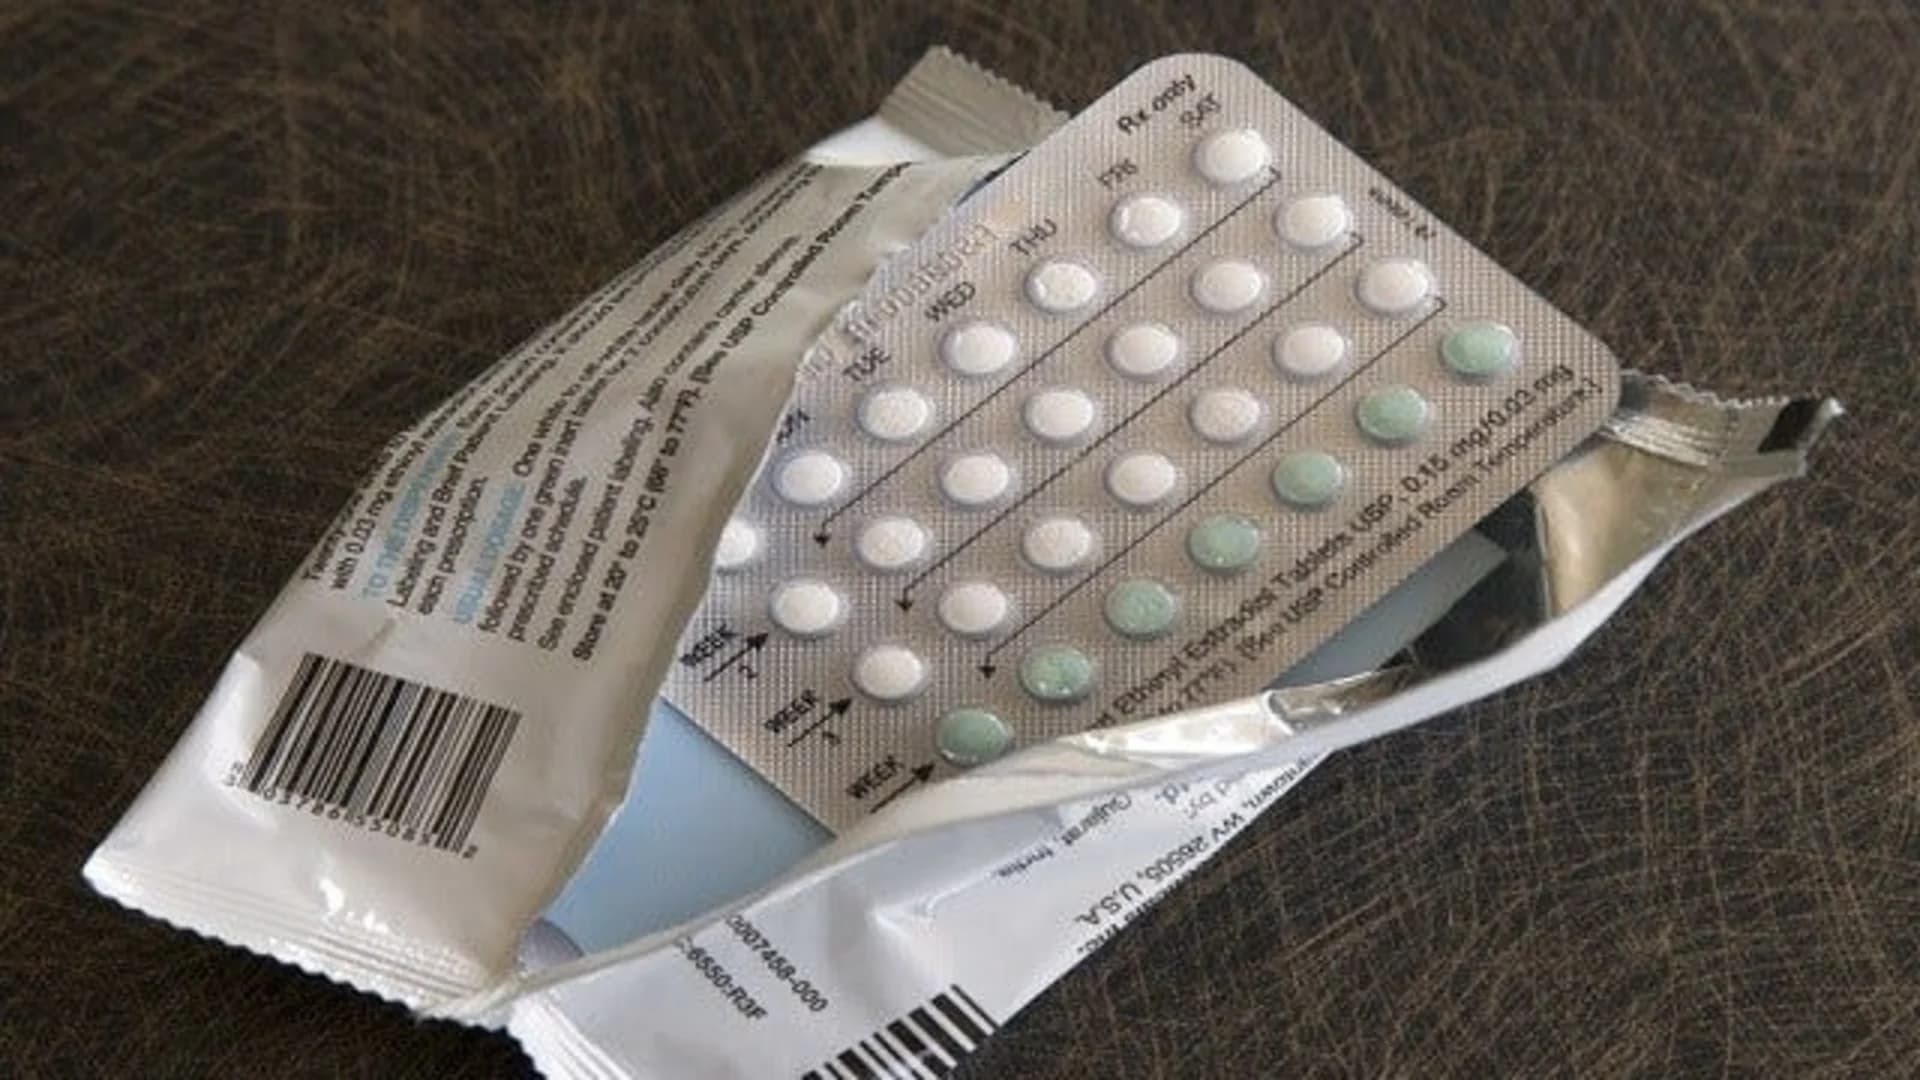 Study: Small risk of breast cancer seen with hormone contraceptives